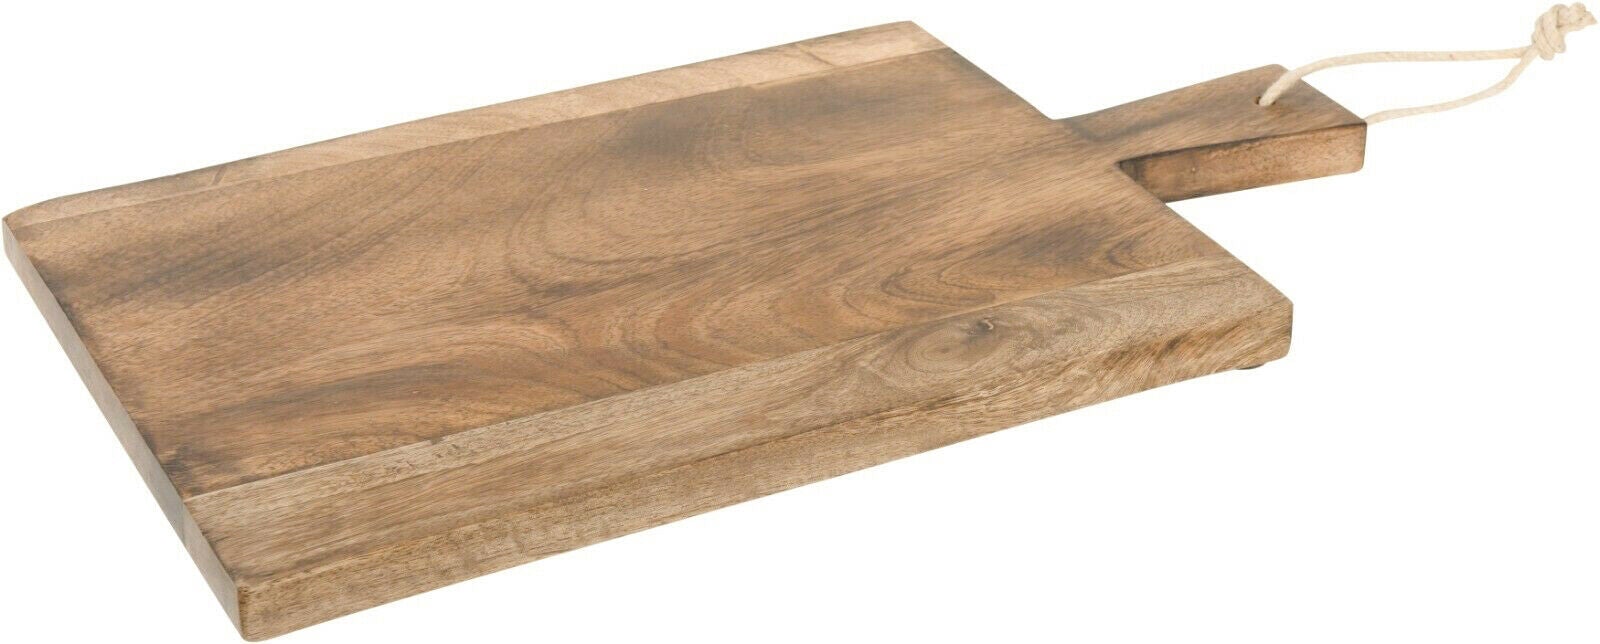 Large 45cm Wooden Chopping Board Mango Wood Cheese Serving Platter Cutting Board